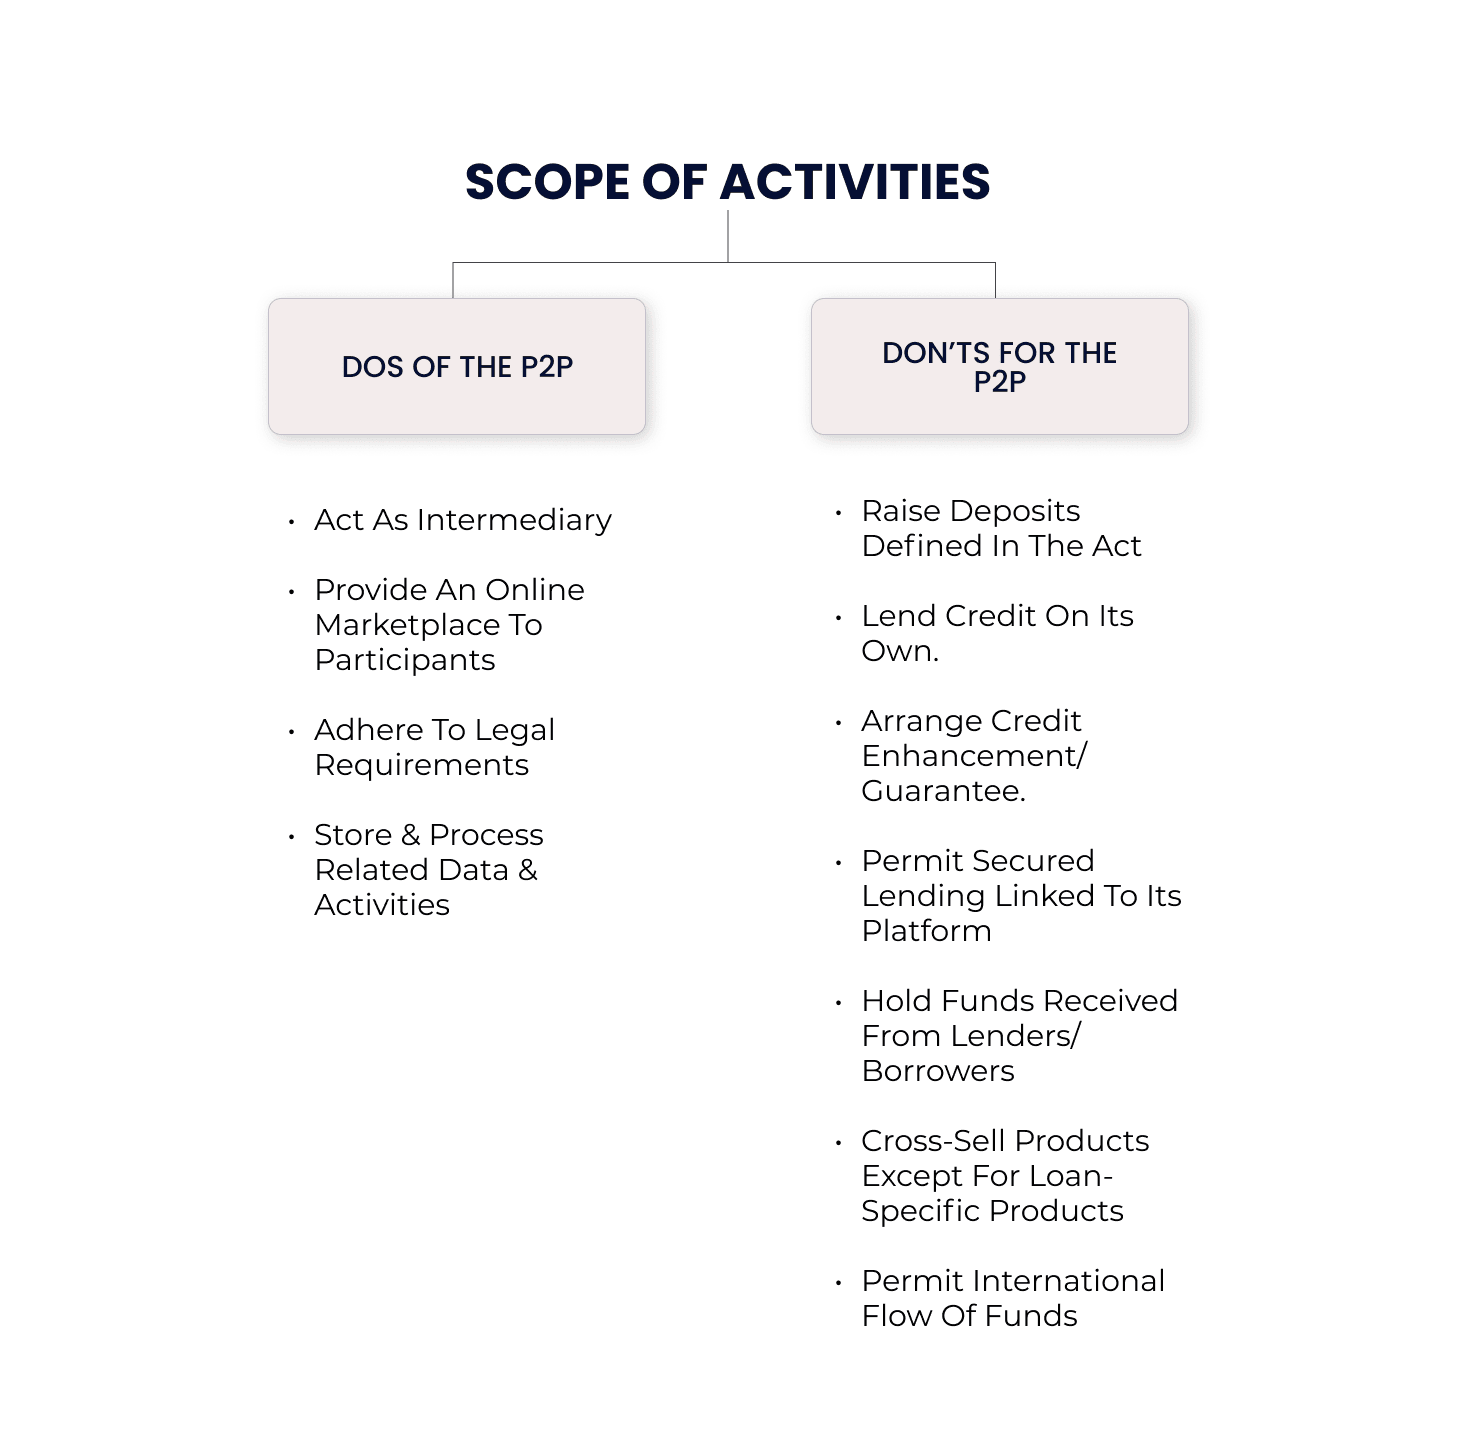 Scope of Activities for P2P License